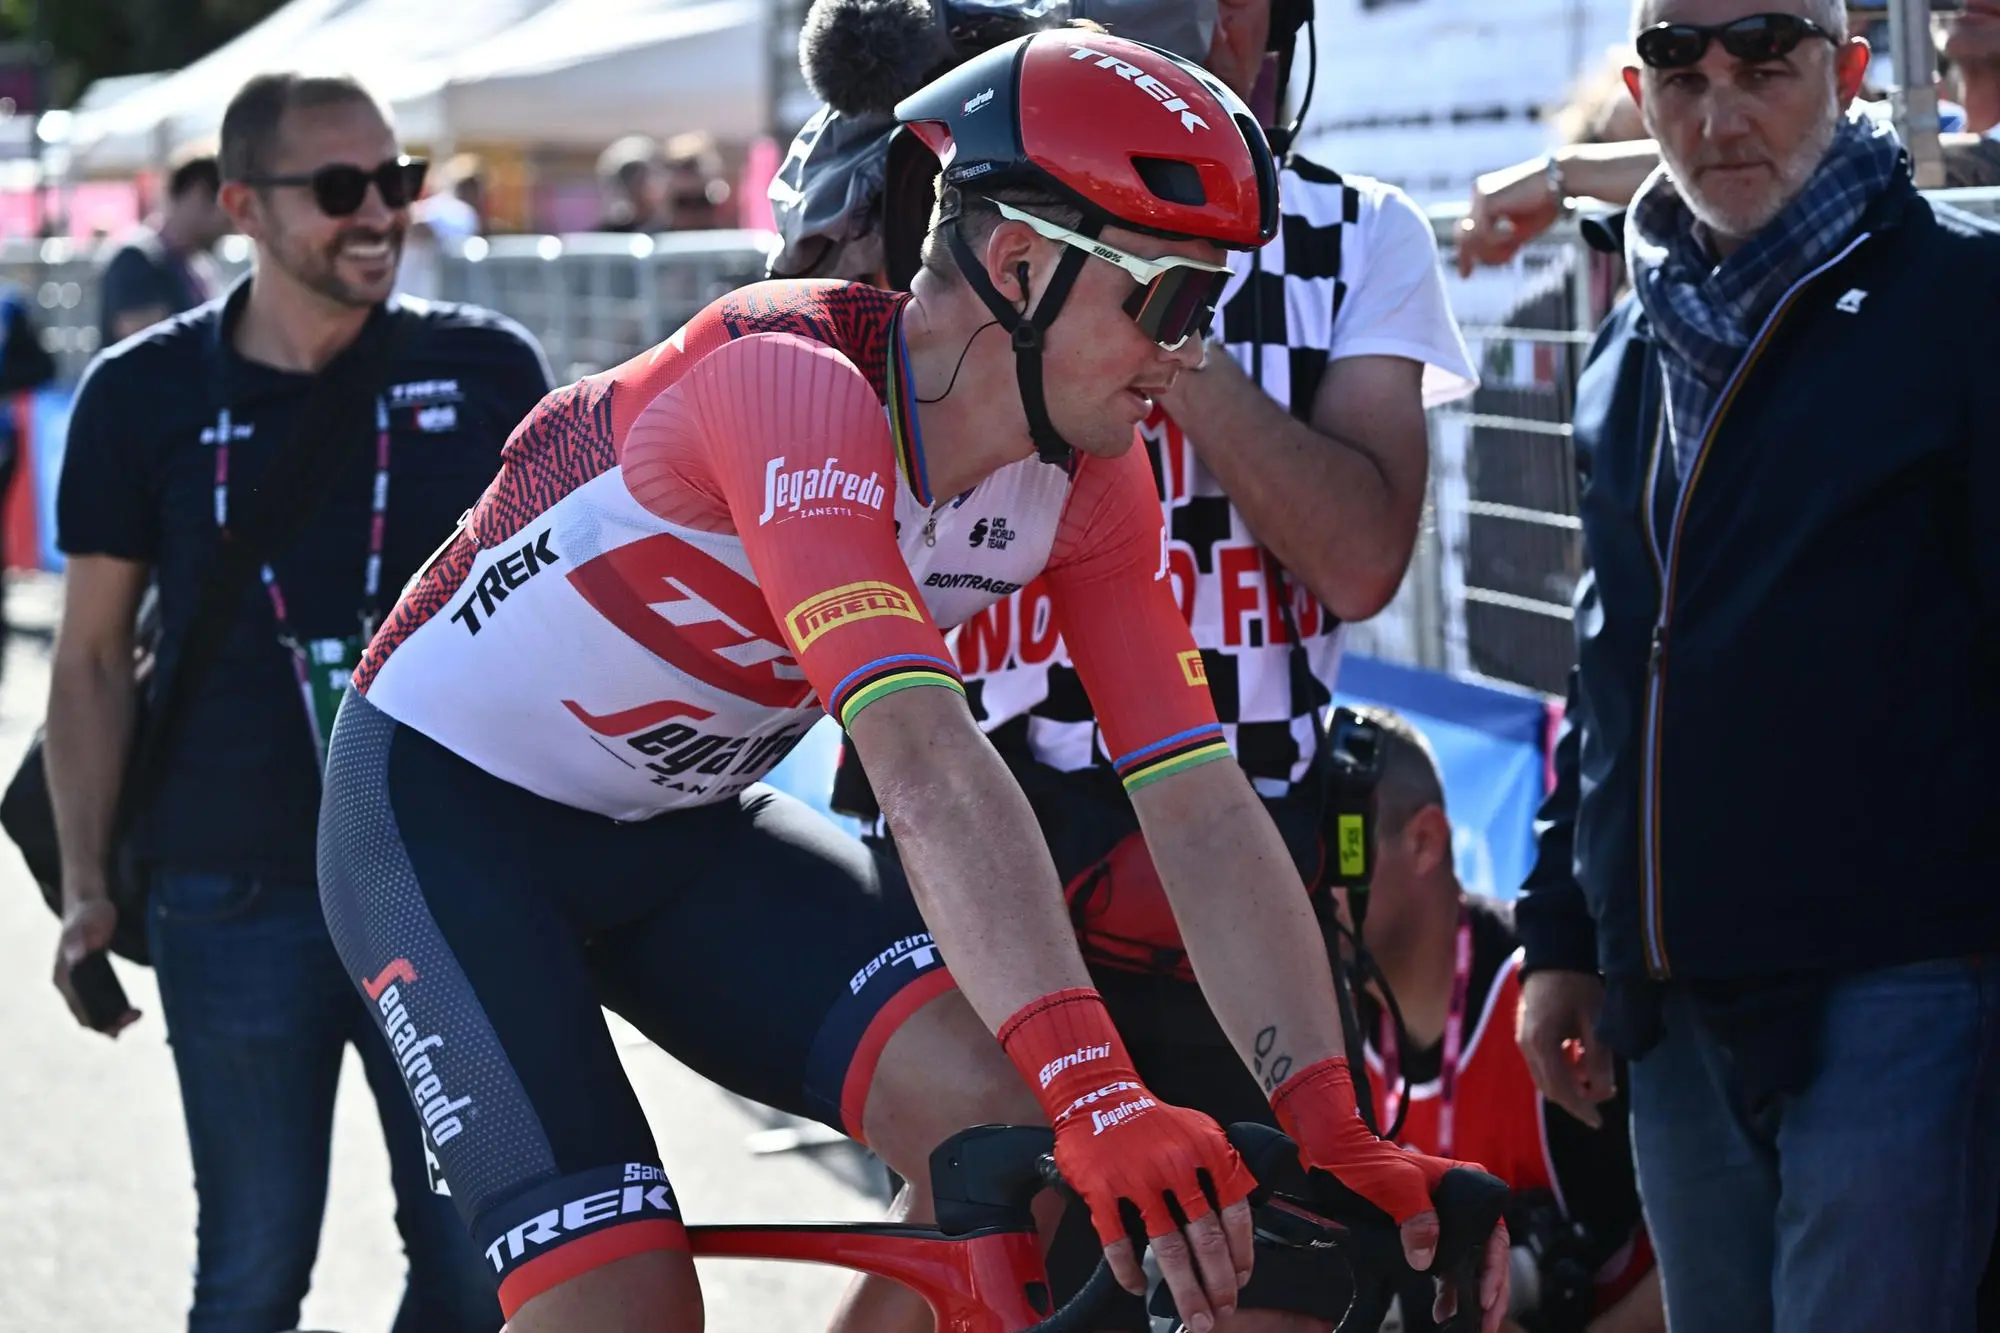 Danish rider Mads Pedersen of team Trek Segafredo celebrates after crossing the finish line and winning the sixth stage of the 2023 Giro d'Italia cycling race over 162 km from Napoli to Napoli, Italy, 11 May 2023. ANSA/LUCA ZENNARO